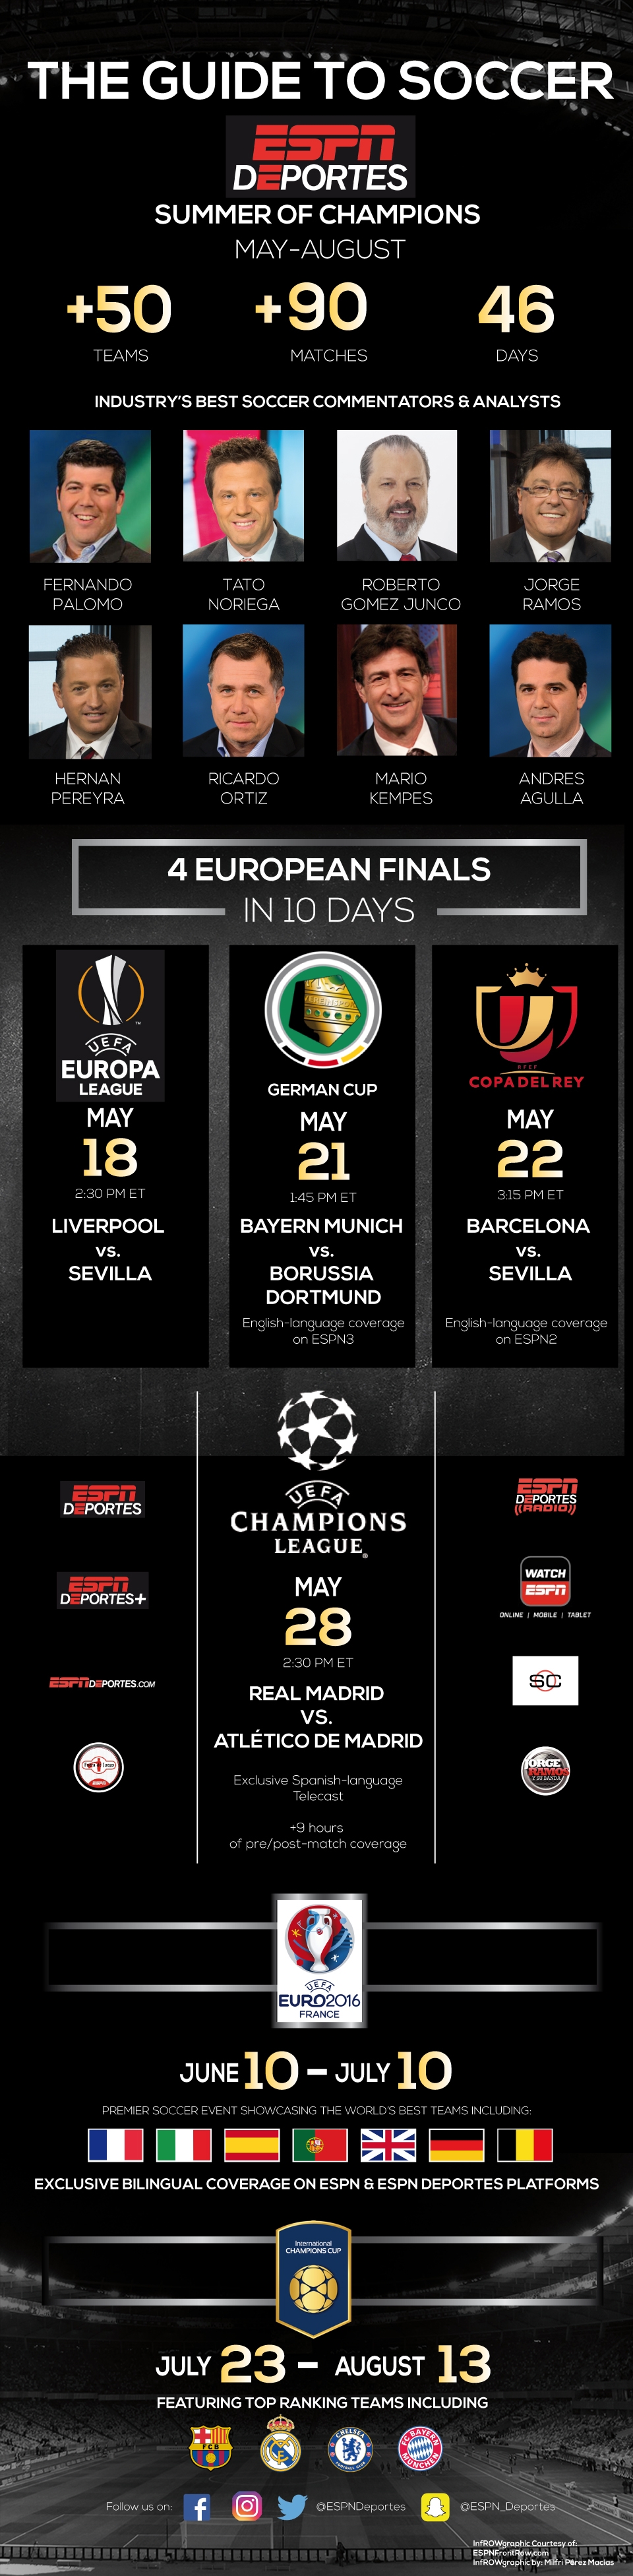 2info-espn-soccer SUMMER OF CHAMPIONS INFROWGRAPHIC